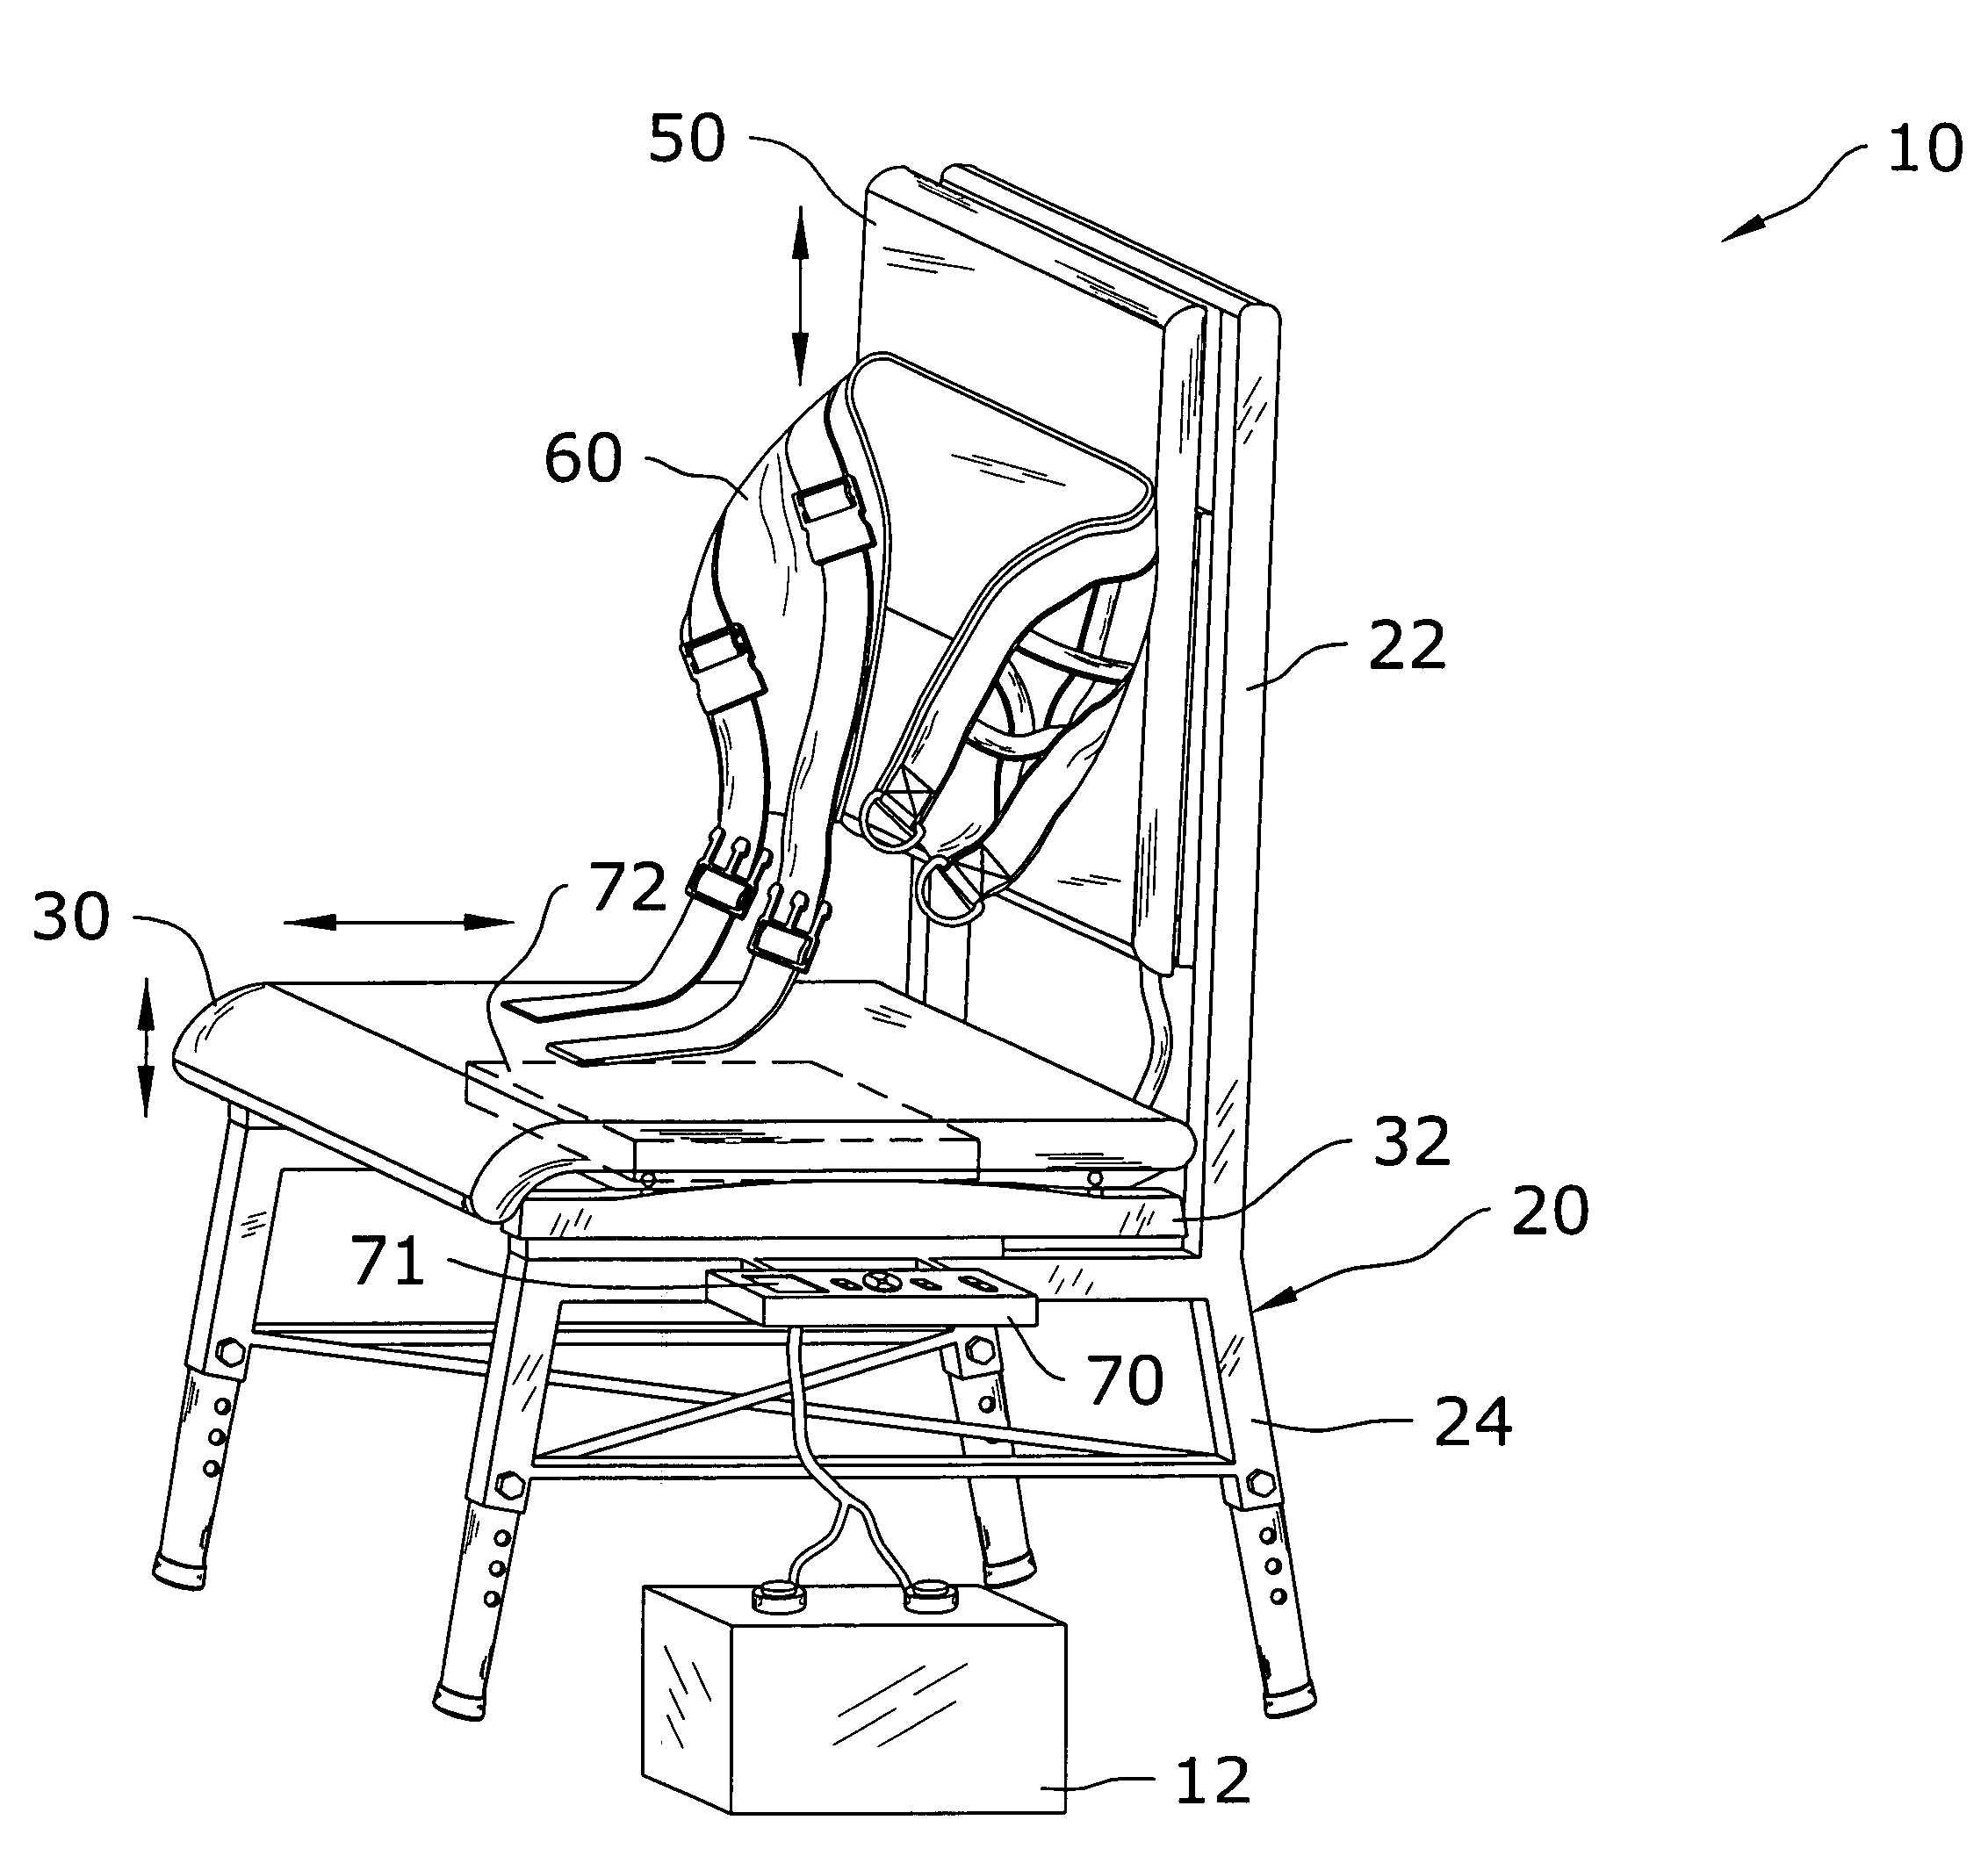 Traction chair system